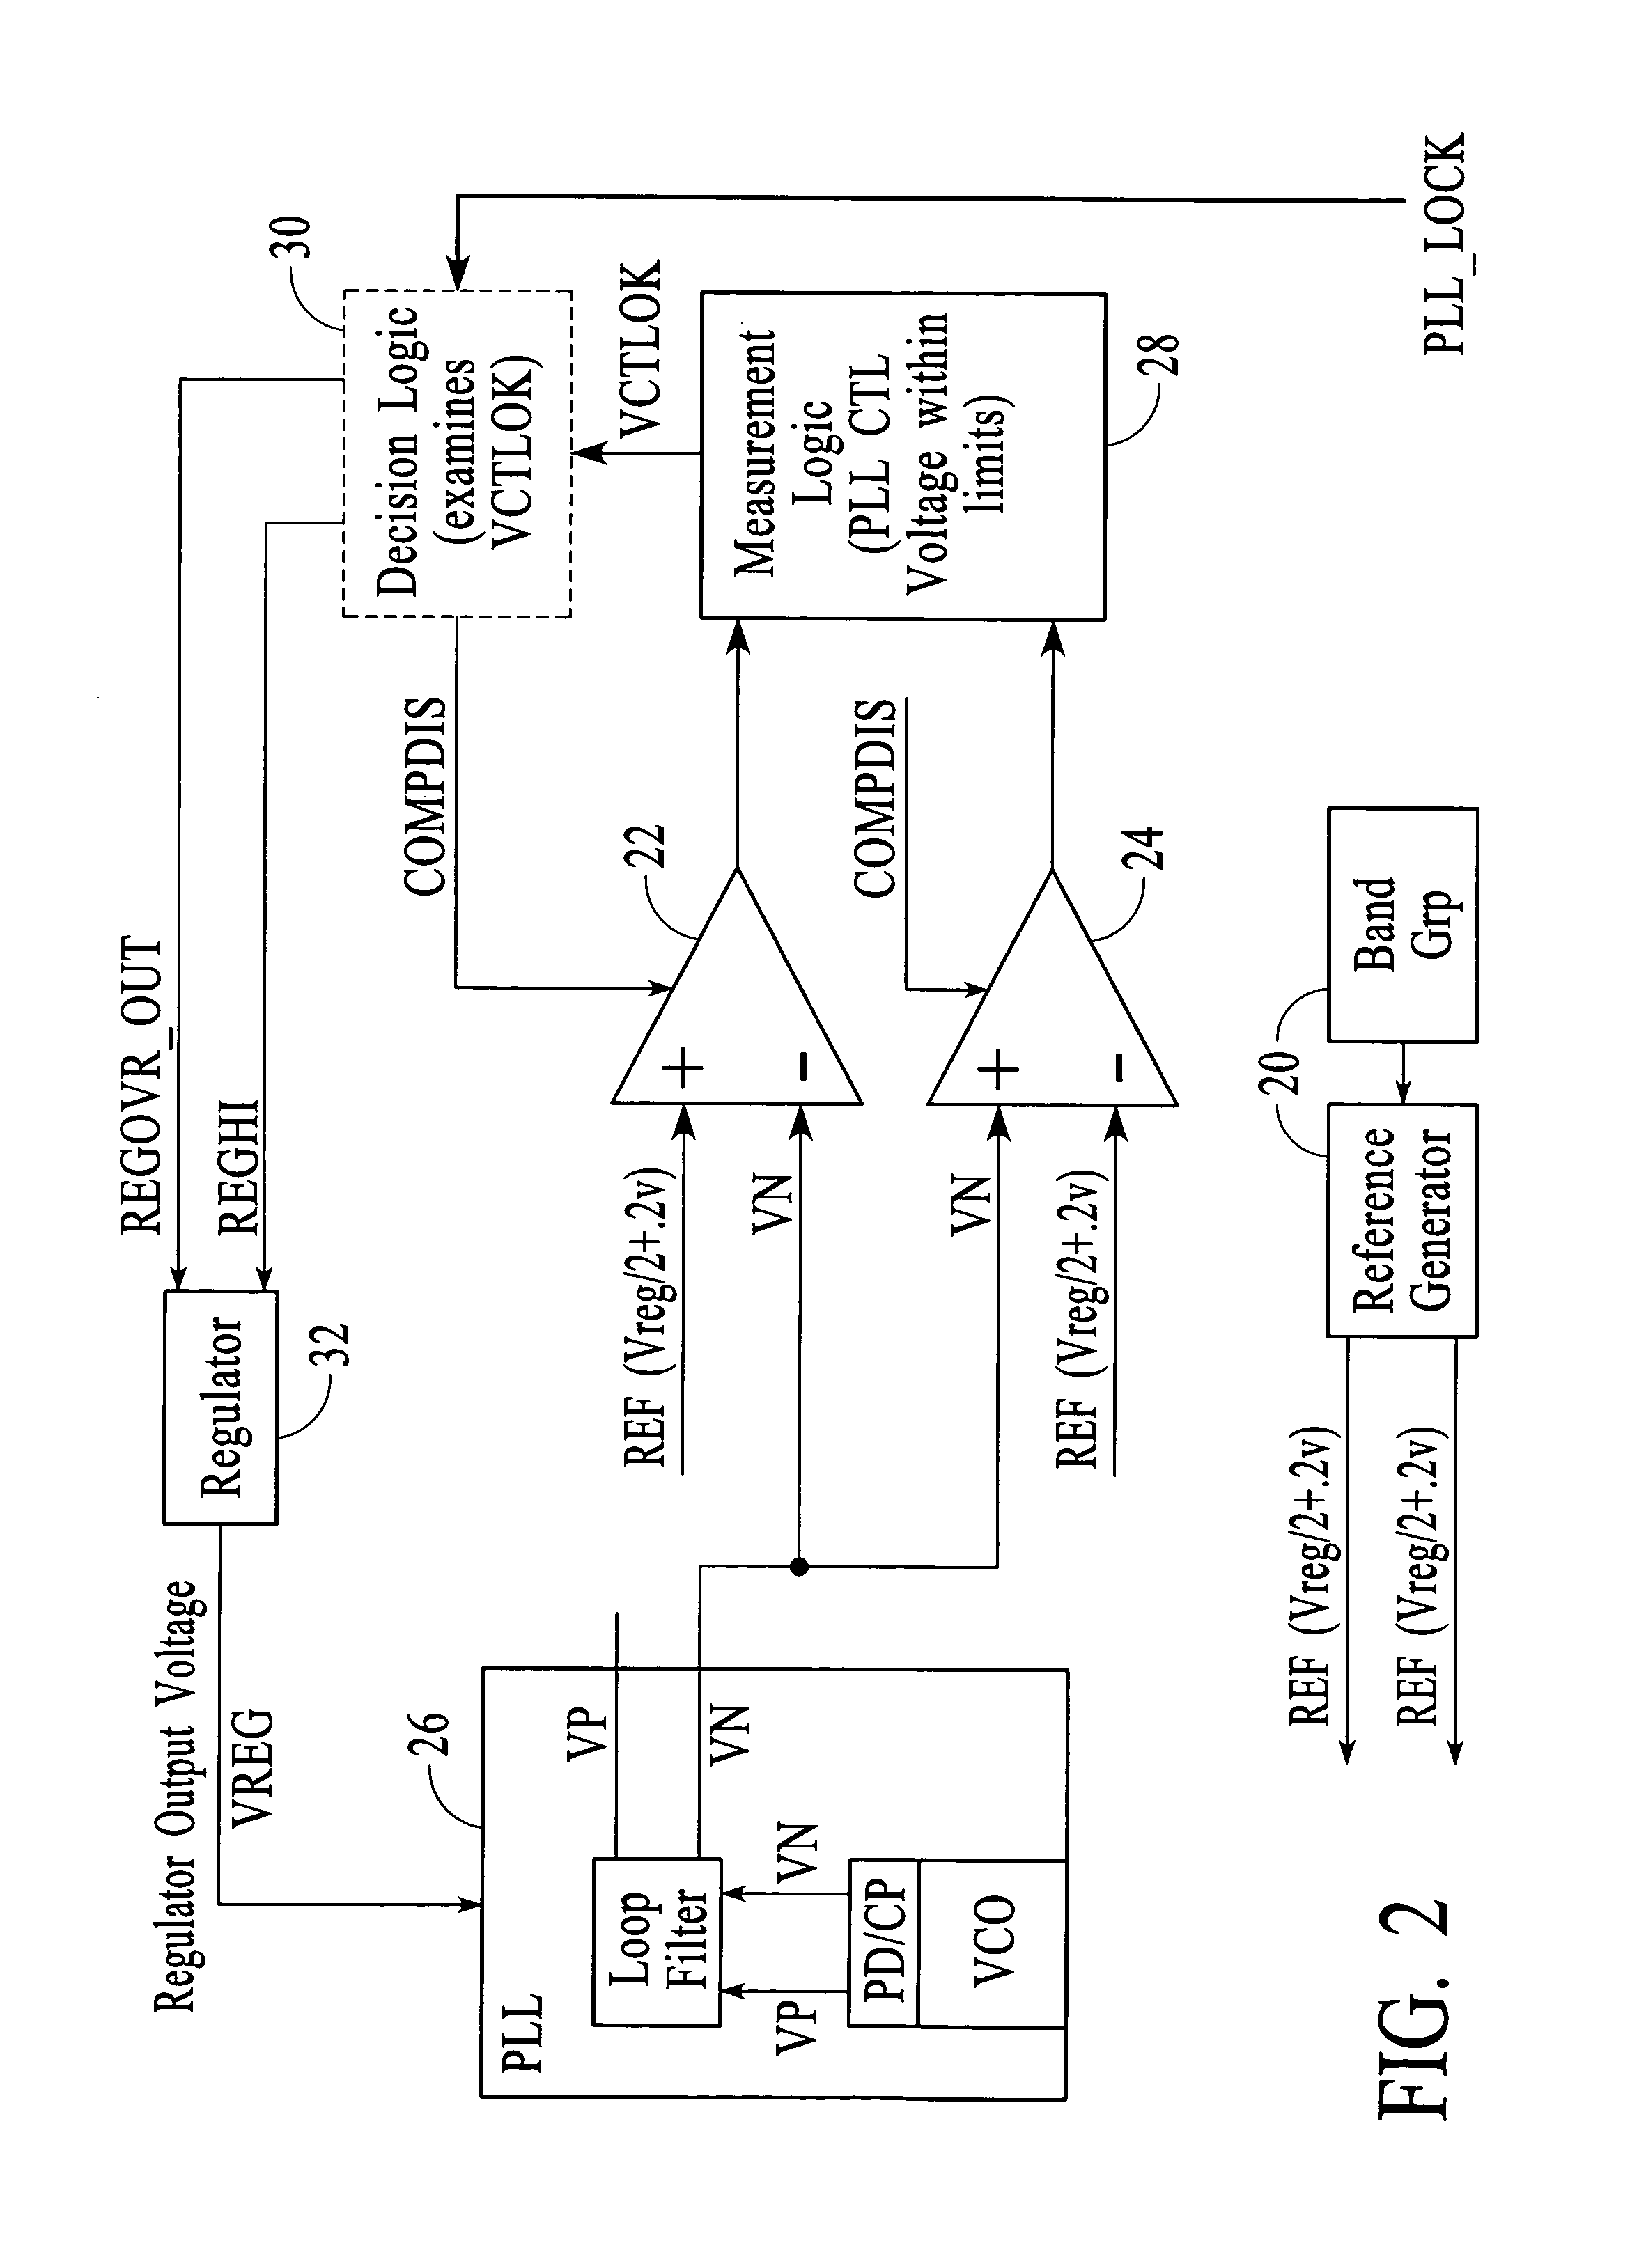 Circuit and method for reducing jitter in a PLL of high speed serial links